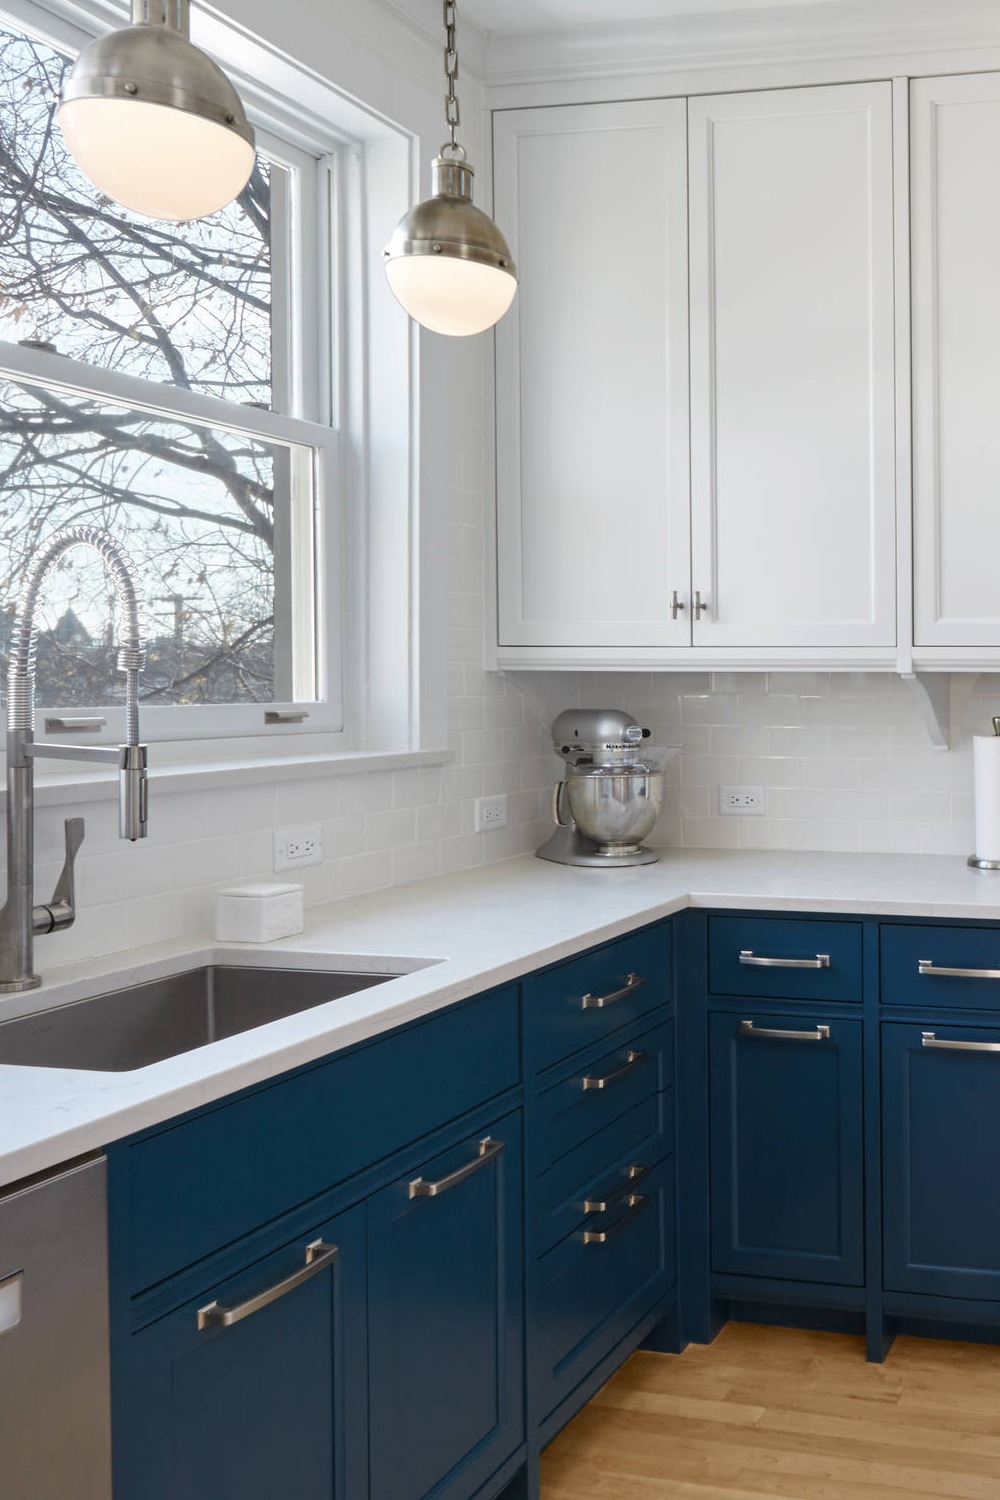 Blue And White Cabinets Stainless Steel Appliances White Upper Cabinets Two Tone Kitchen Features Backsplash Navy Blue Kitchen